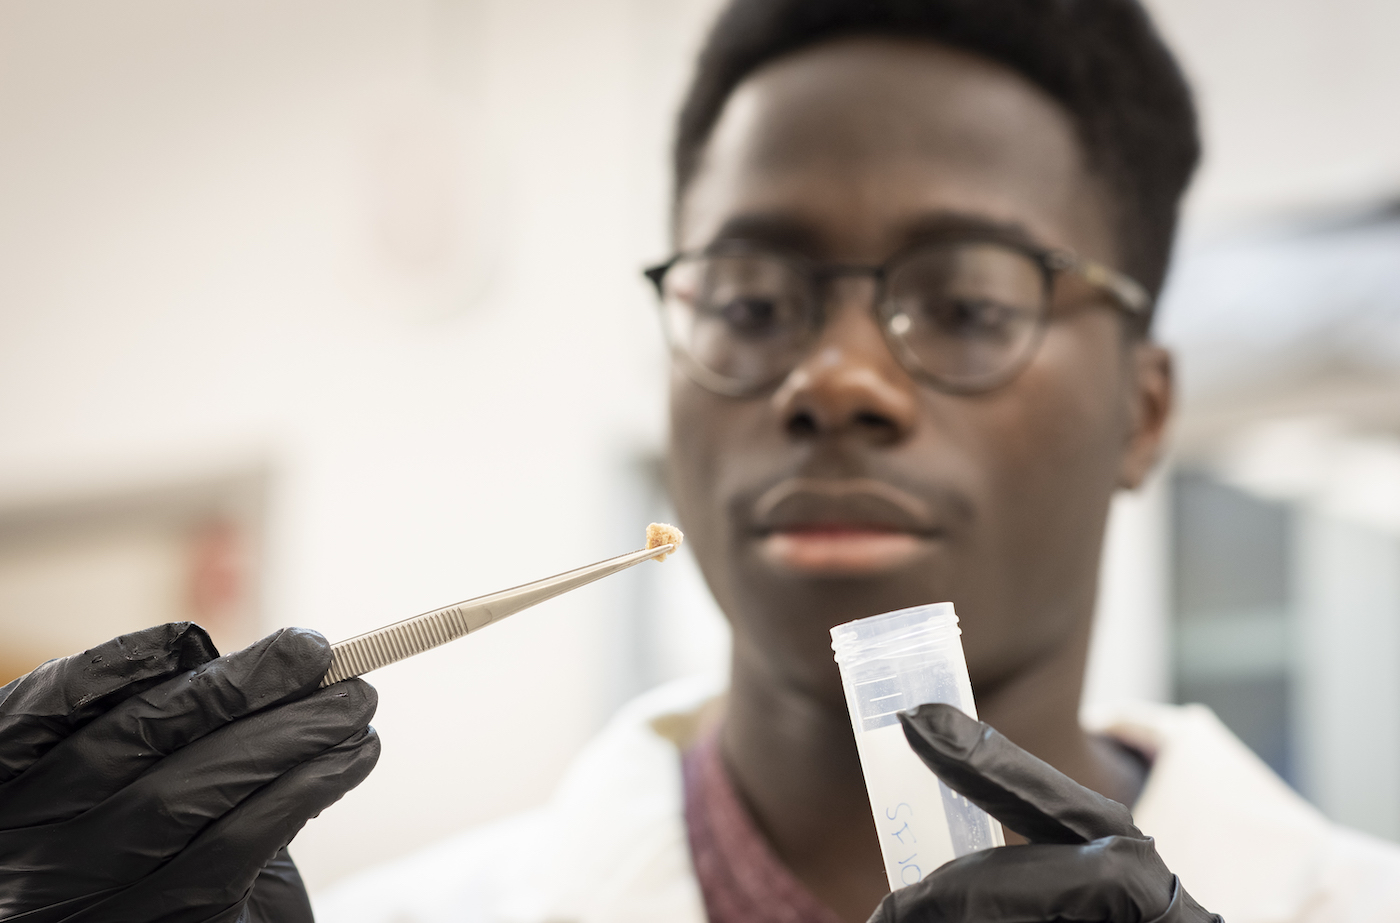 student looks closely at bone sample